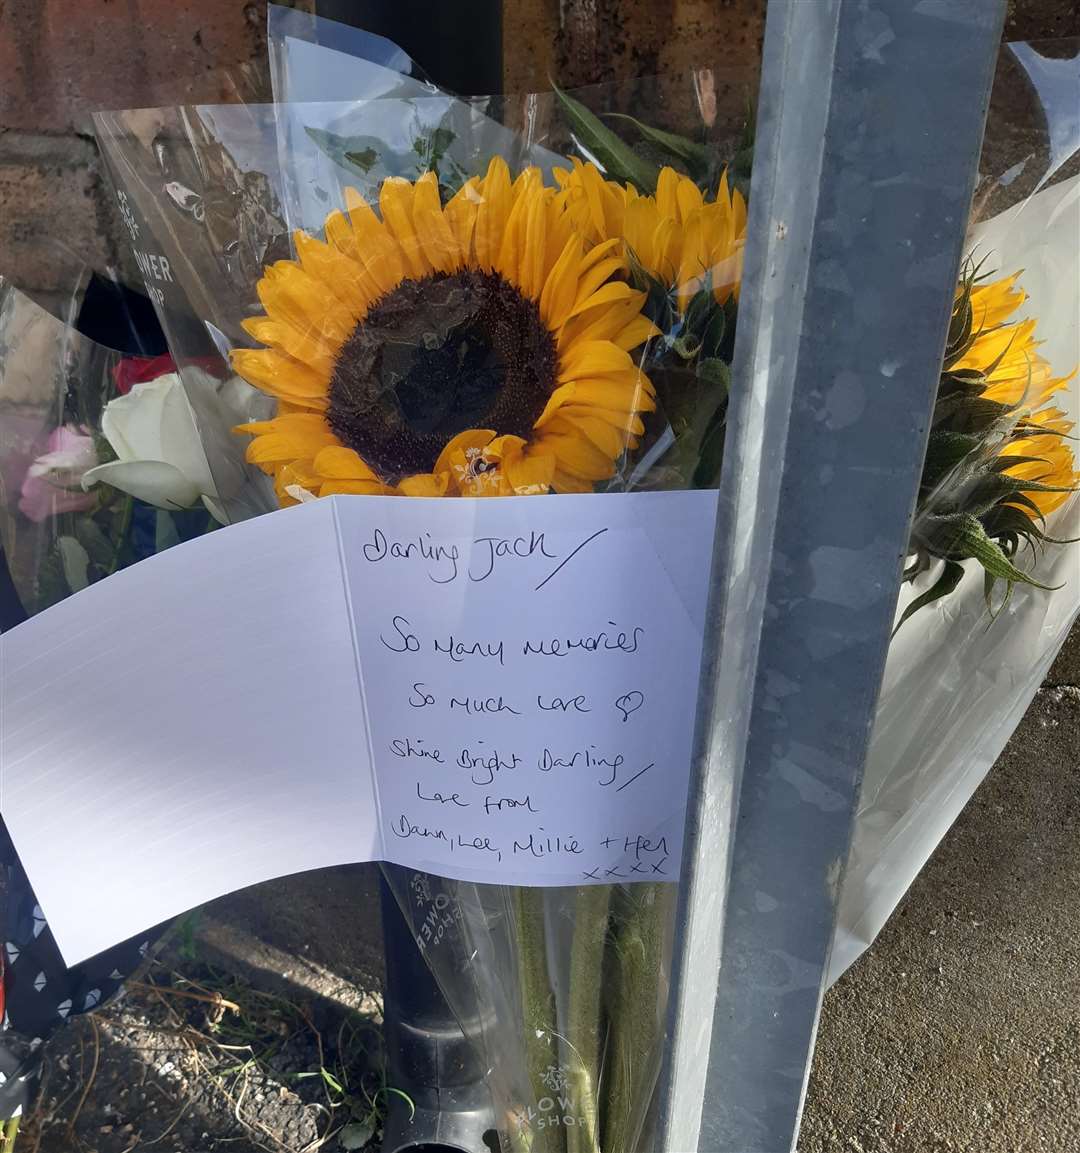 Tributes were paid to the deceased, named locally as Jack